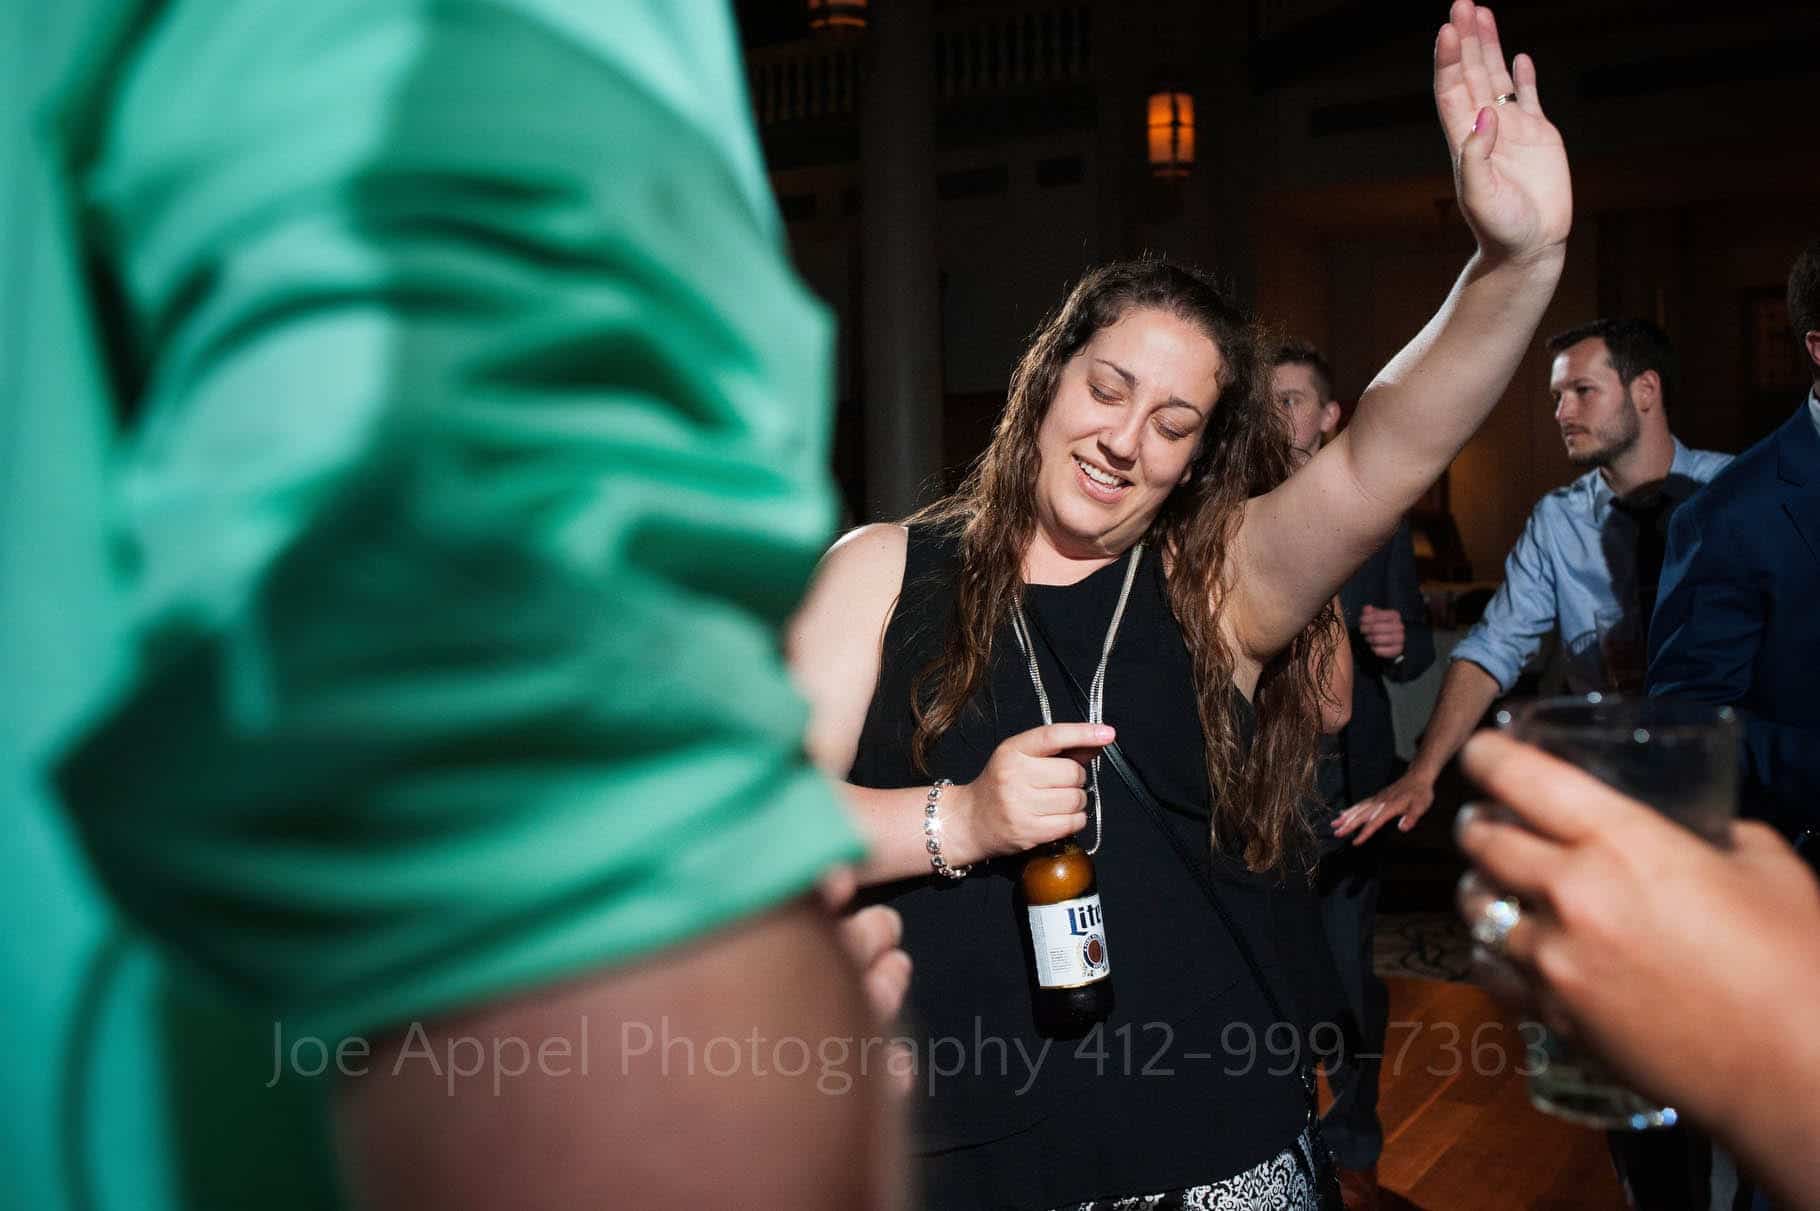 A woman holding a bottle of beer raises her left hand into the air as she dances in front of a man wearing a green shirt.